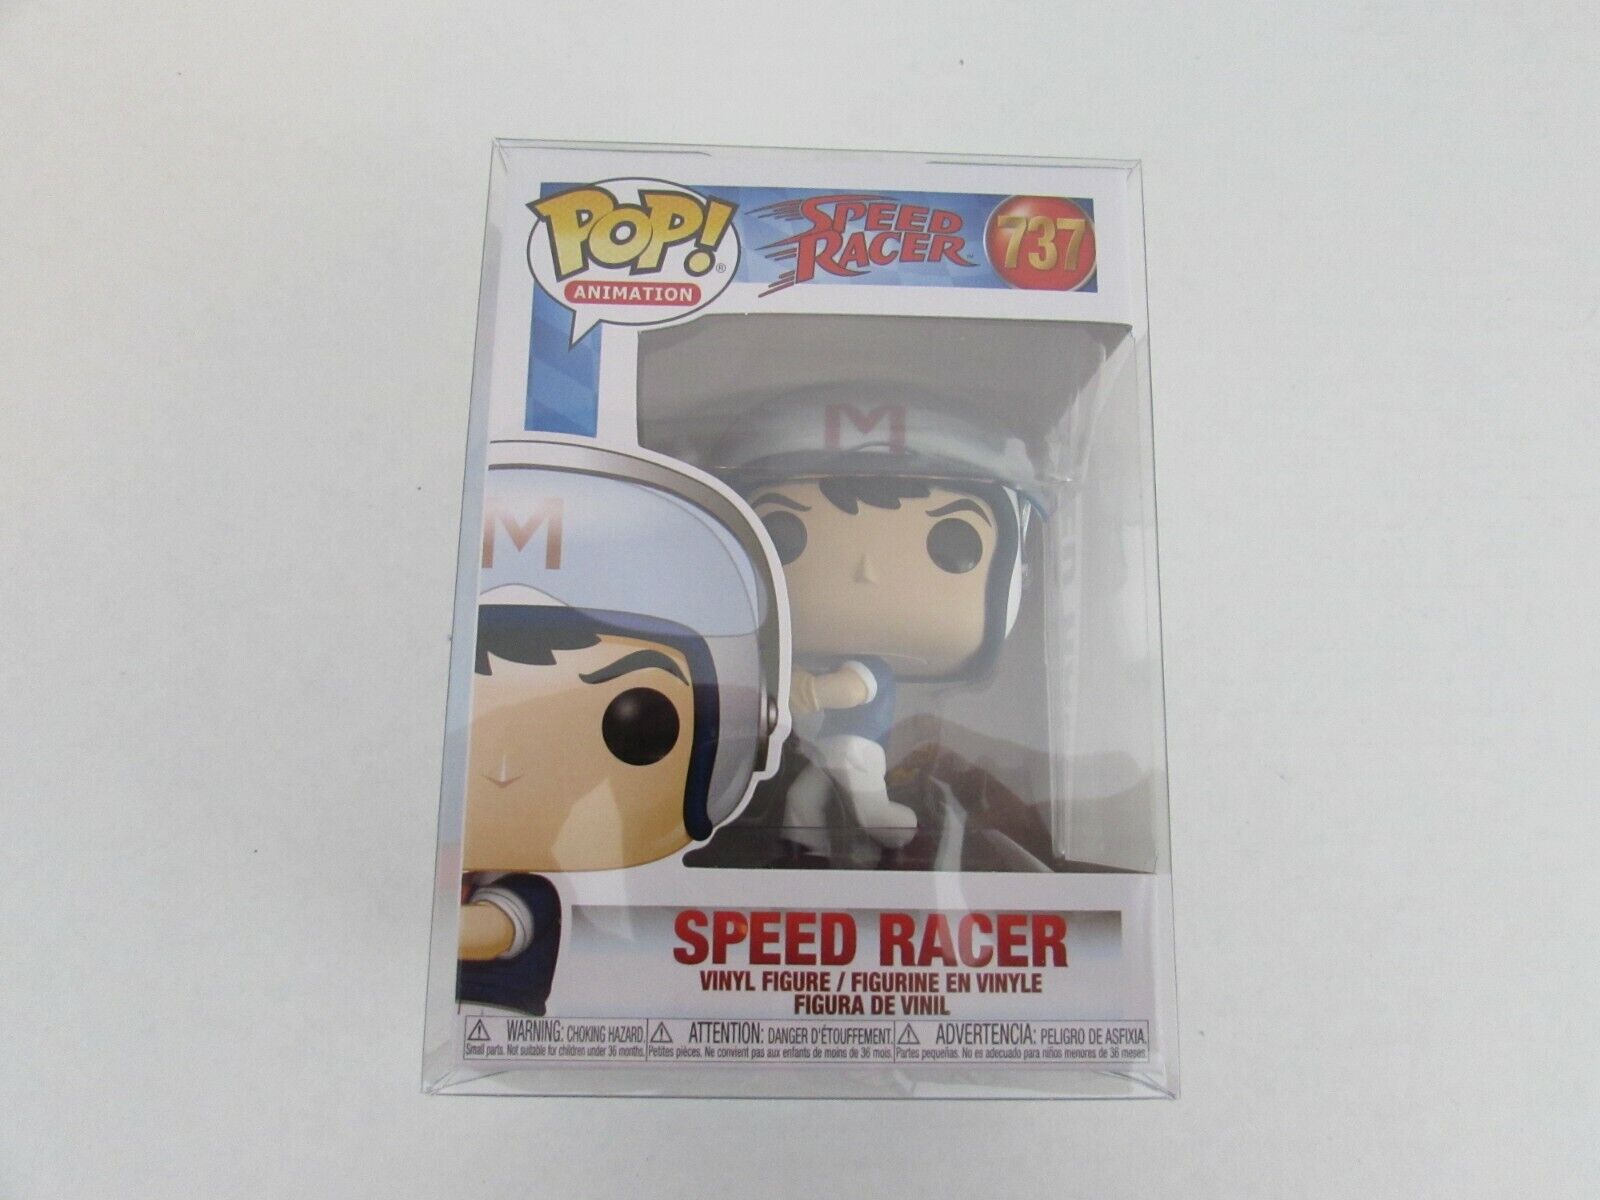 Funko Pop Animation Speed Racer #737 New in Box in Pop Protector 